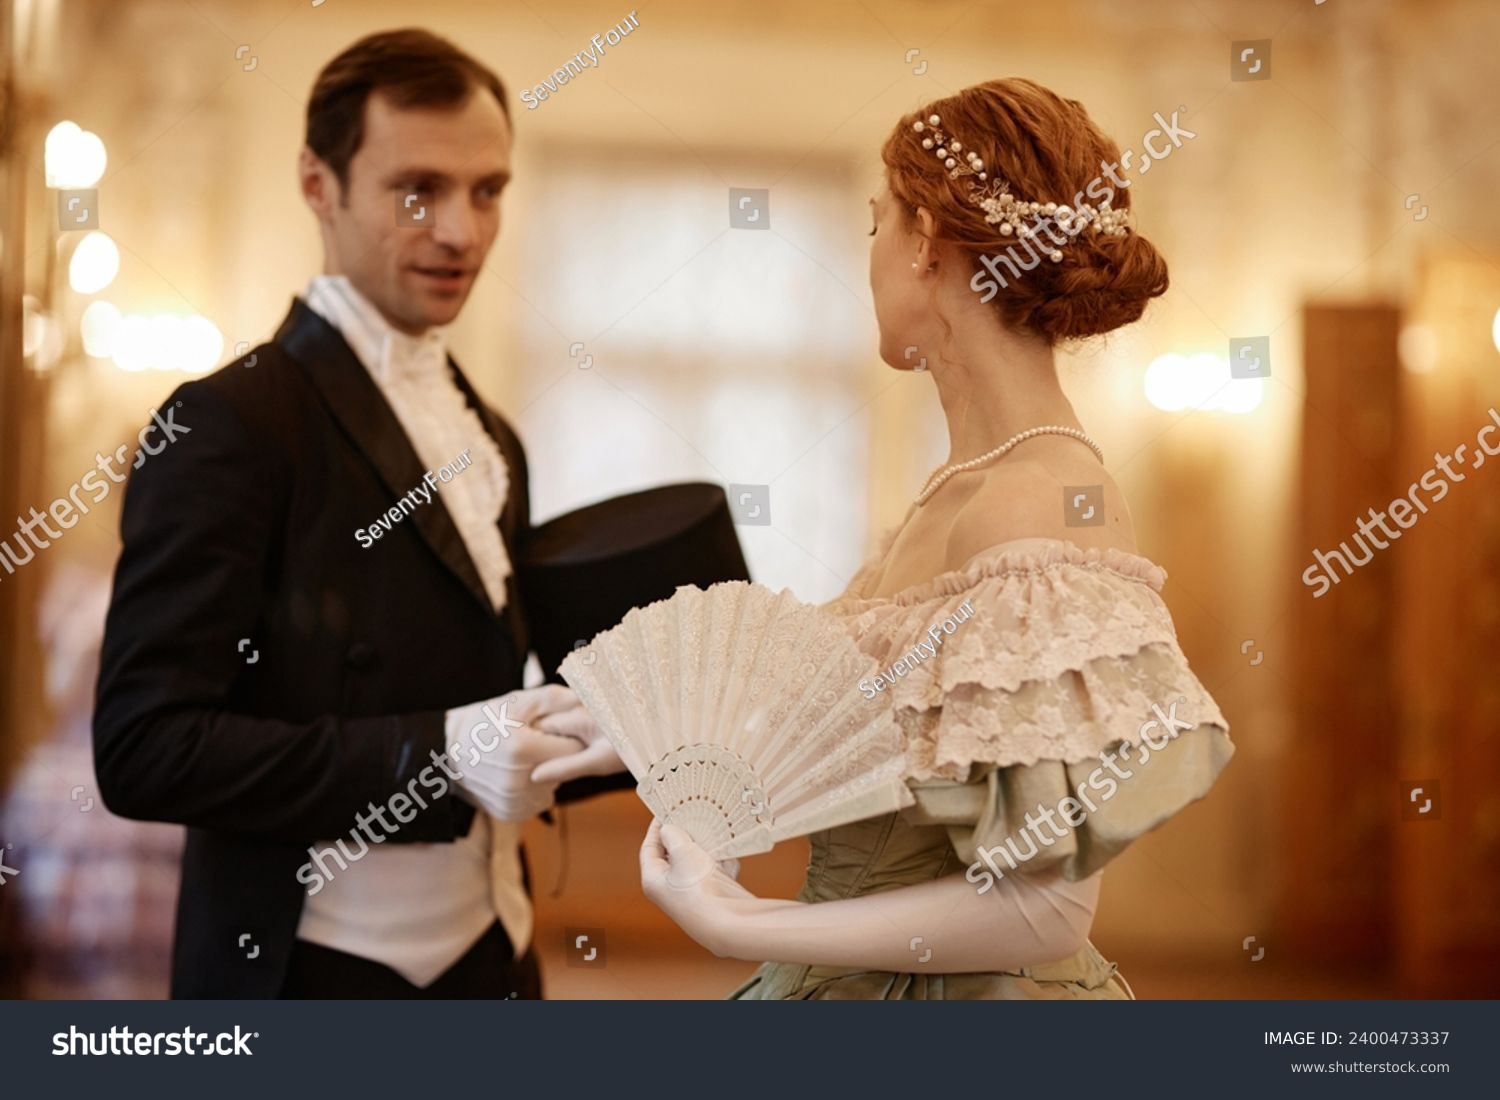 Waist up portrait of elegant couple of lady and gentleman talking in palace hall, copy space #2400473337